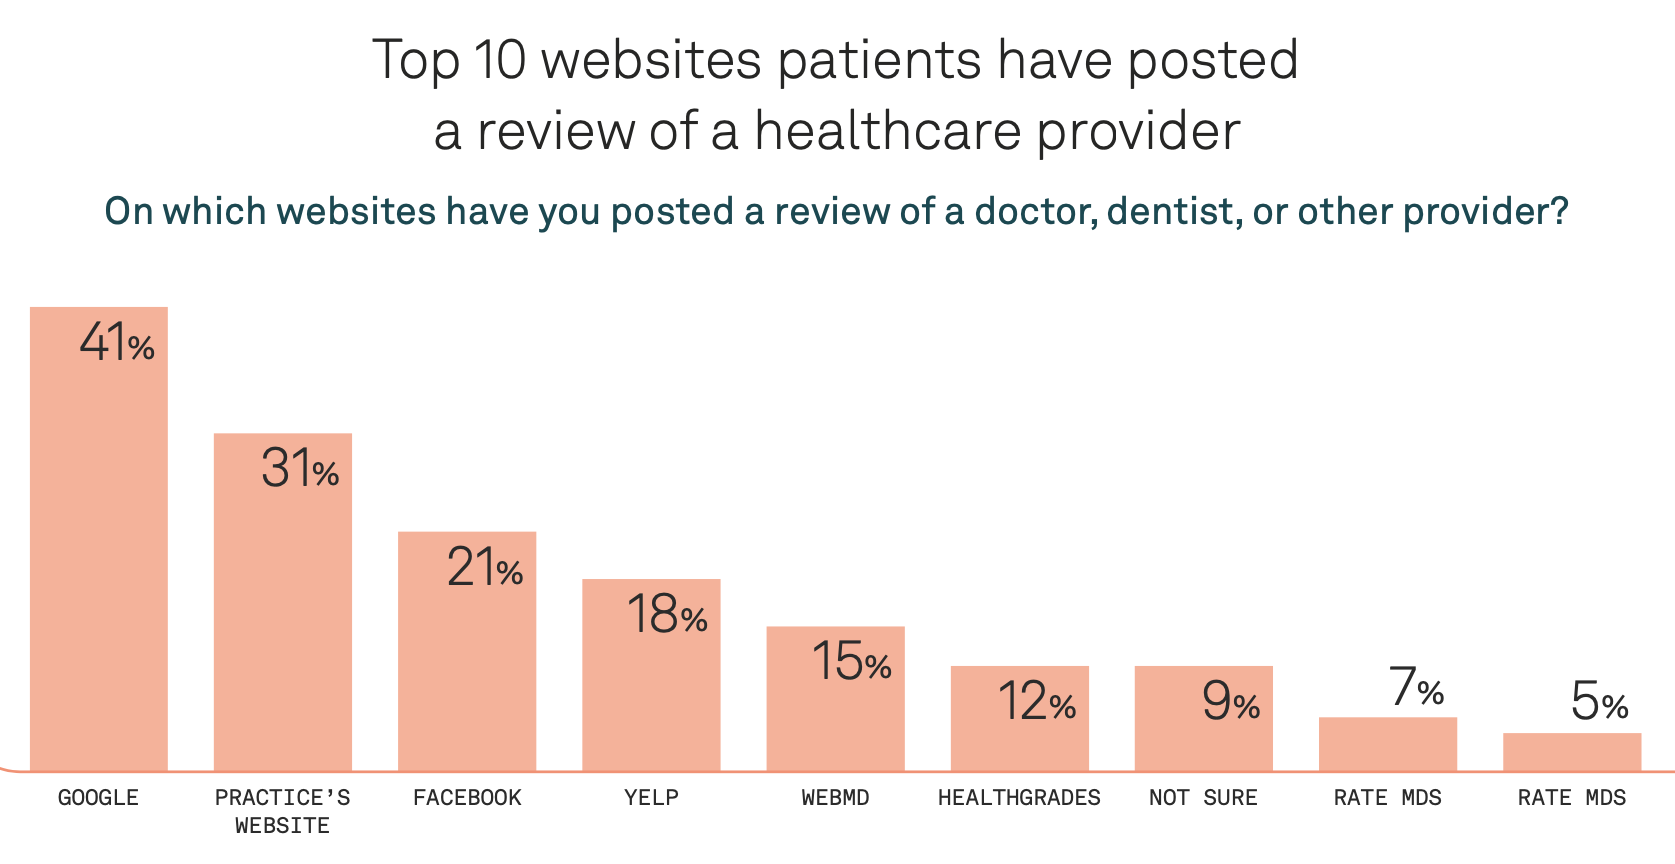 Chart of "Top 10 websites patients have posted a review of a healthcare provider / "On which websites have you posted a review of a doctor, dentist, or other provider?" Results follow: 41% Google, 31% practice's website, 21% Facebook, 18% Yelp, 15% WebMD, 12% Healthgrades, 9% not sure, 7% Rate MDs, 5% Rate MDs (sic)